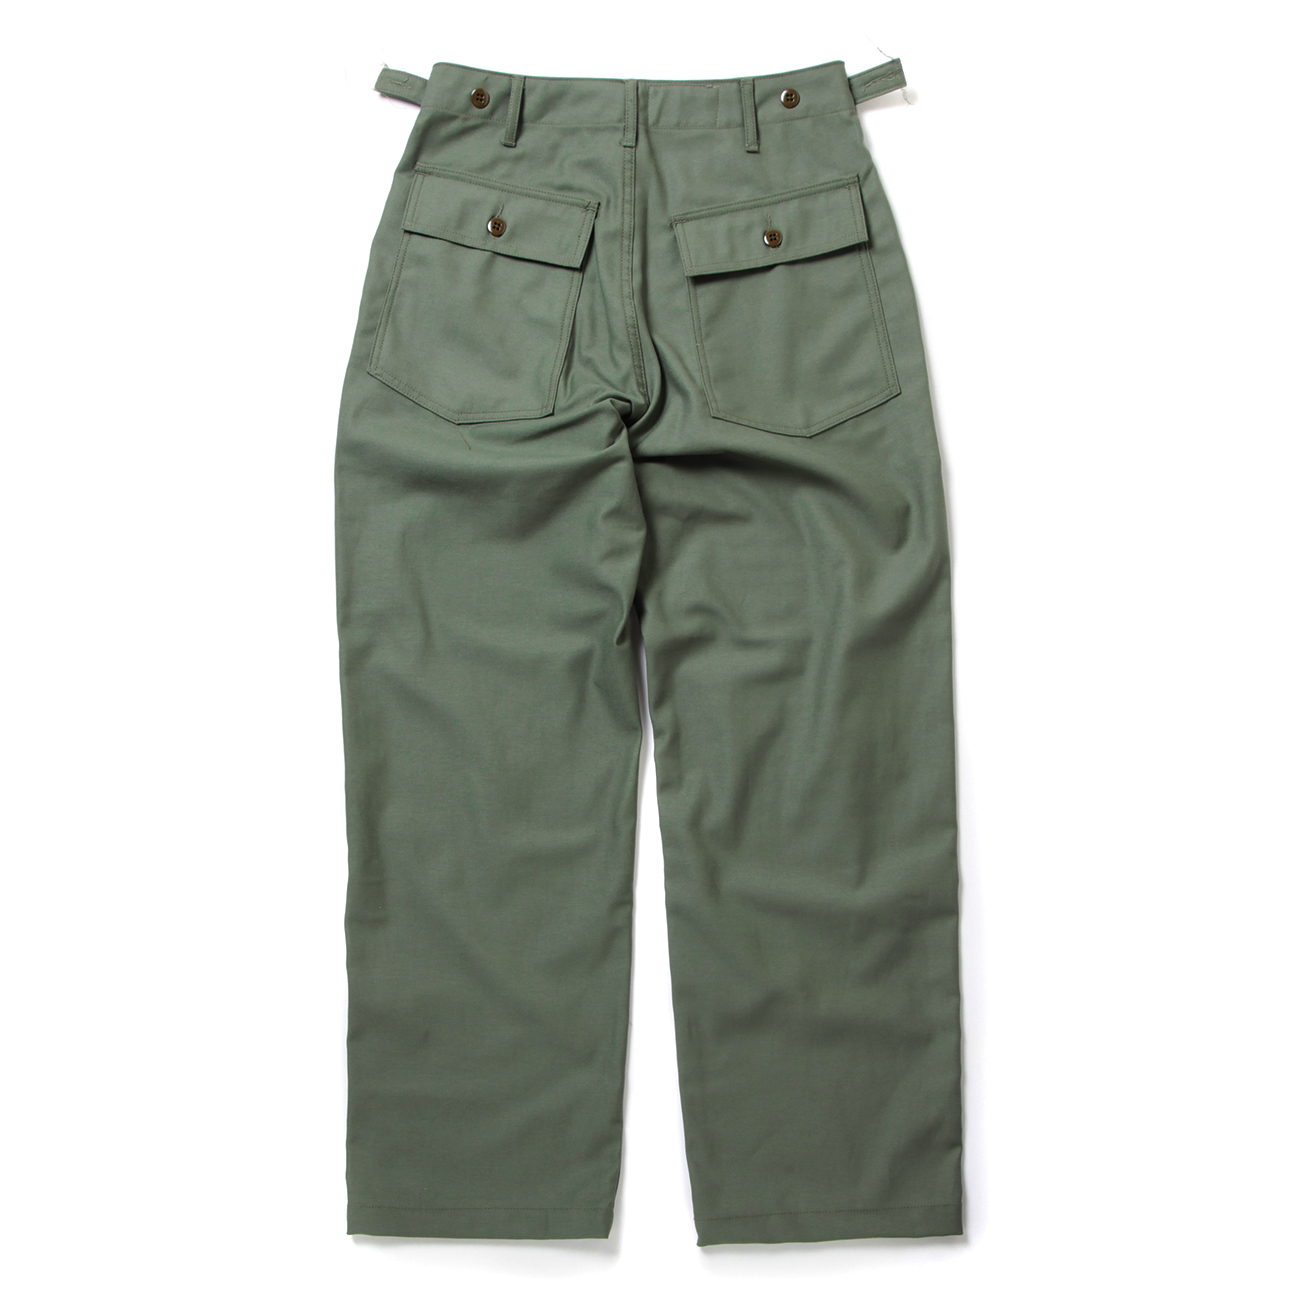 EG Workaday - Fatigue Pant - Cotton Reversed Sateen - Olive